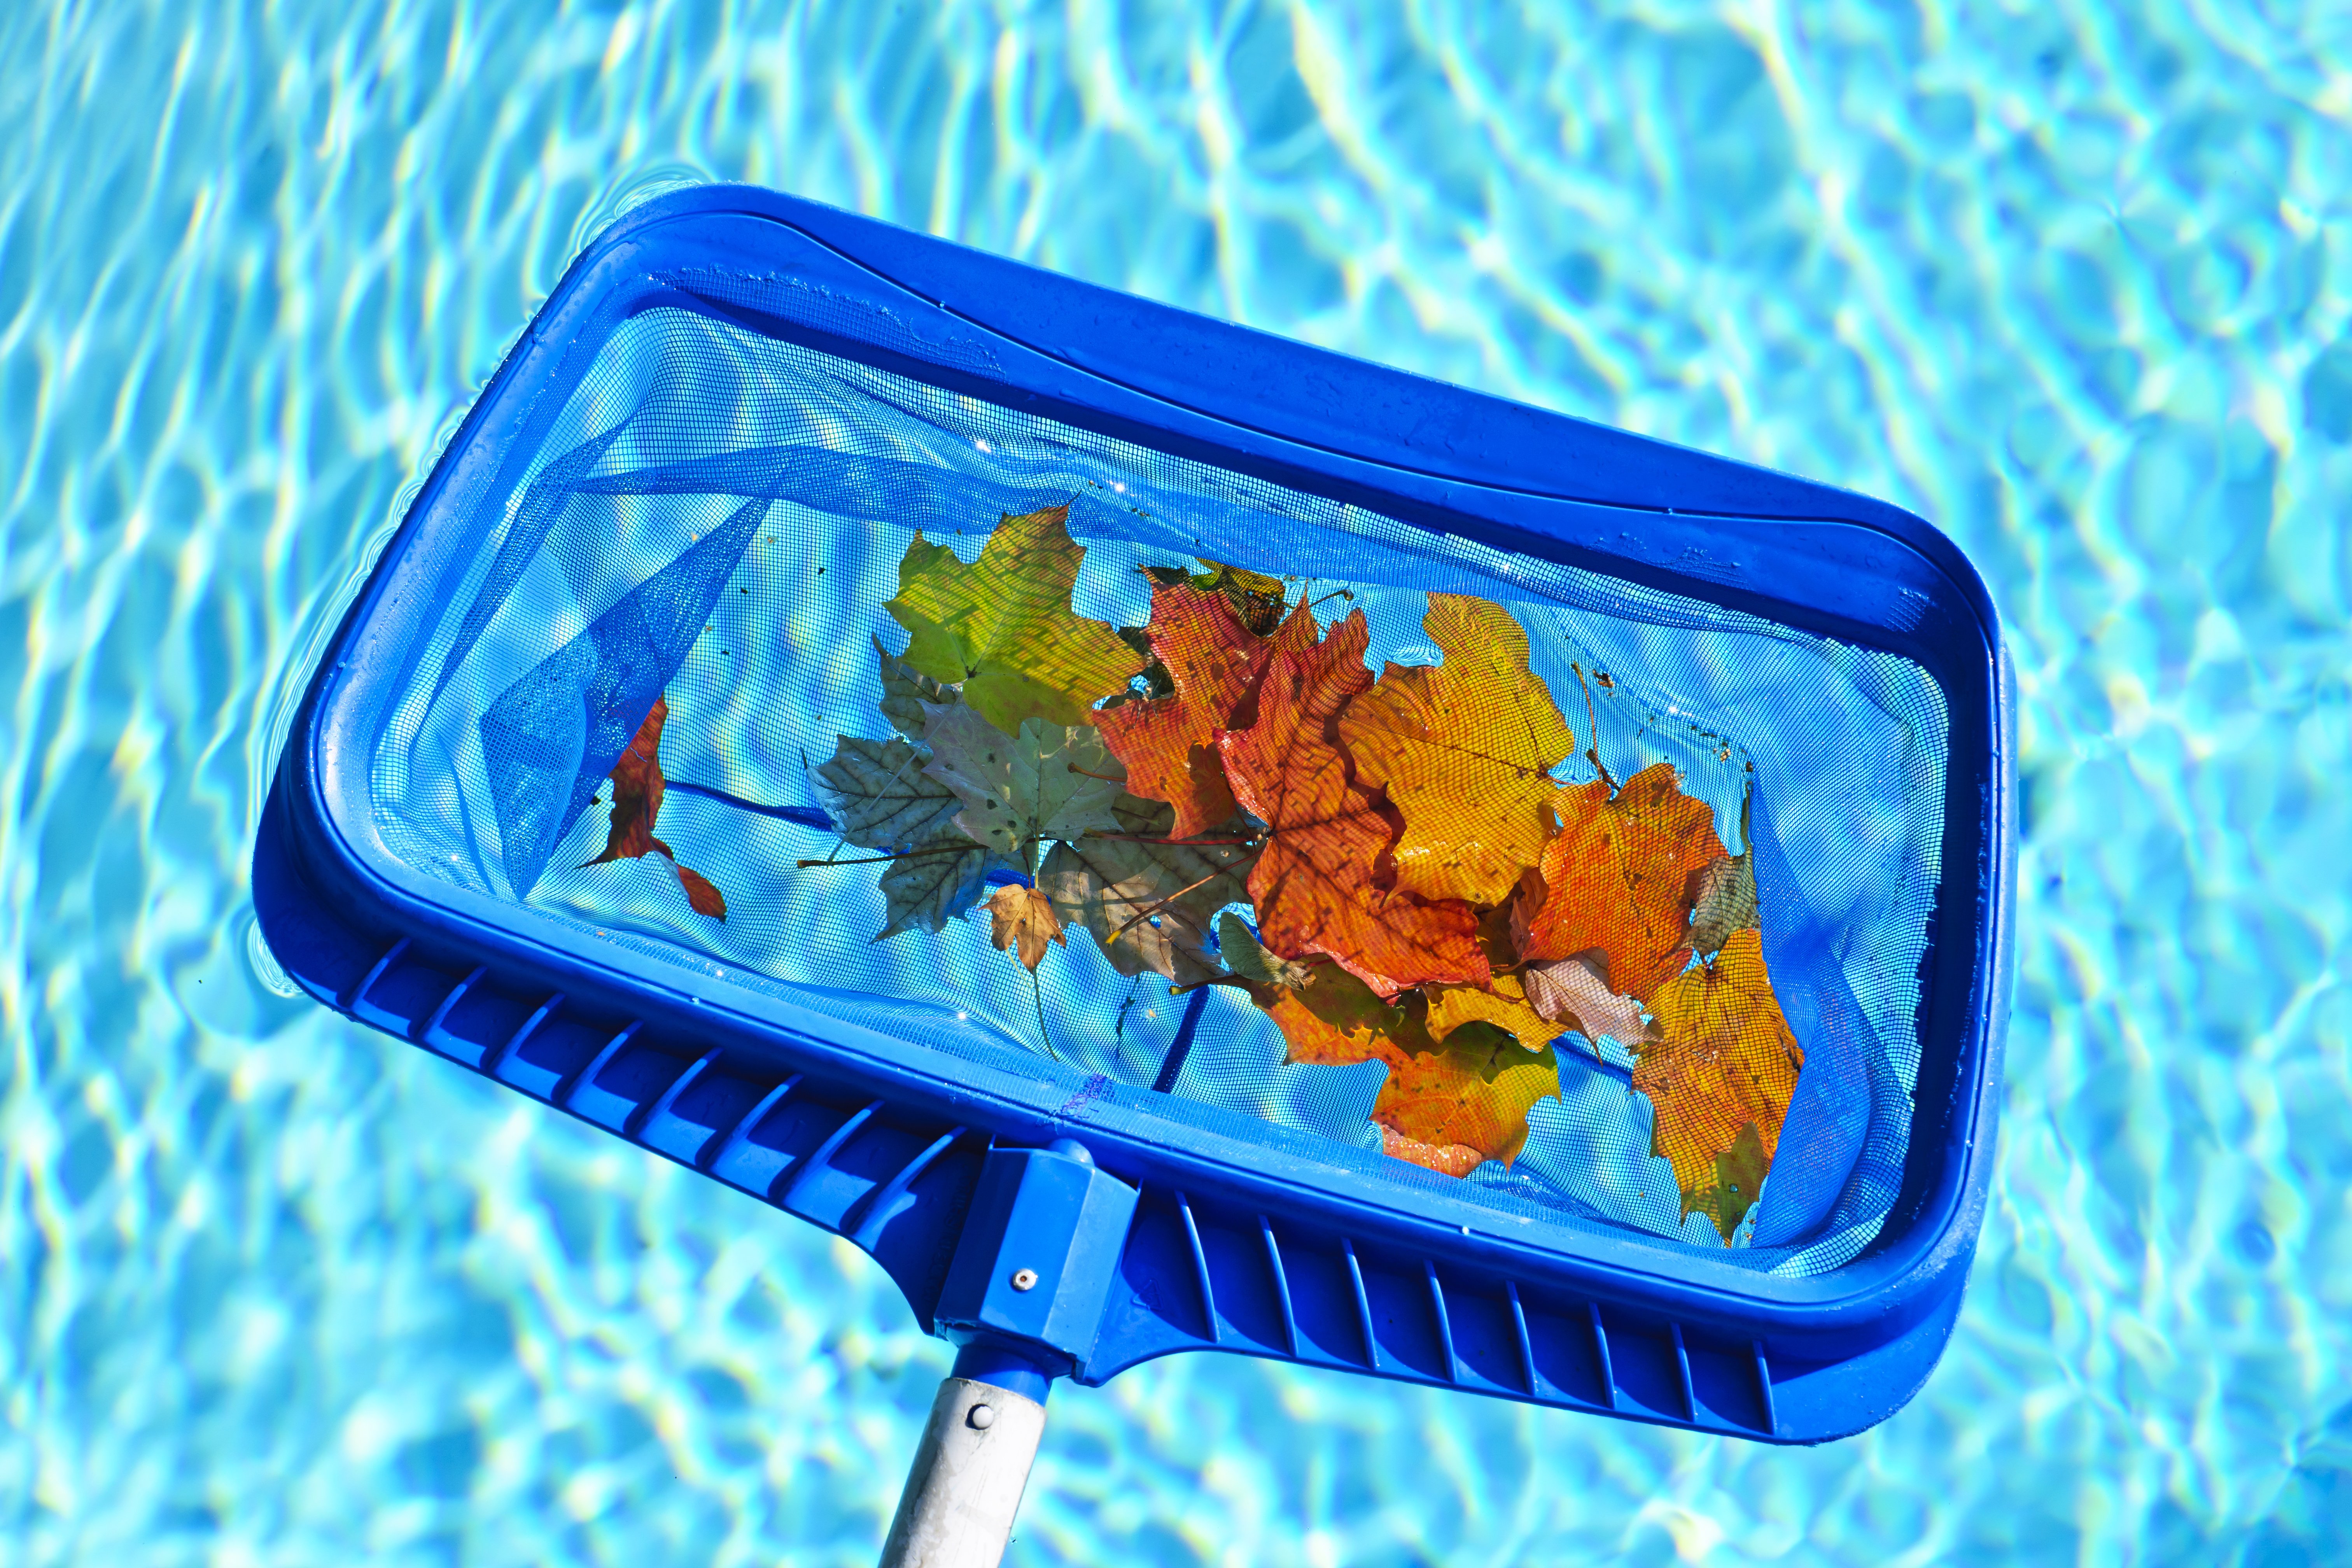 Autumn Pool Cleanup